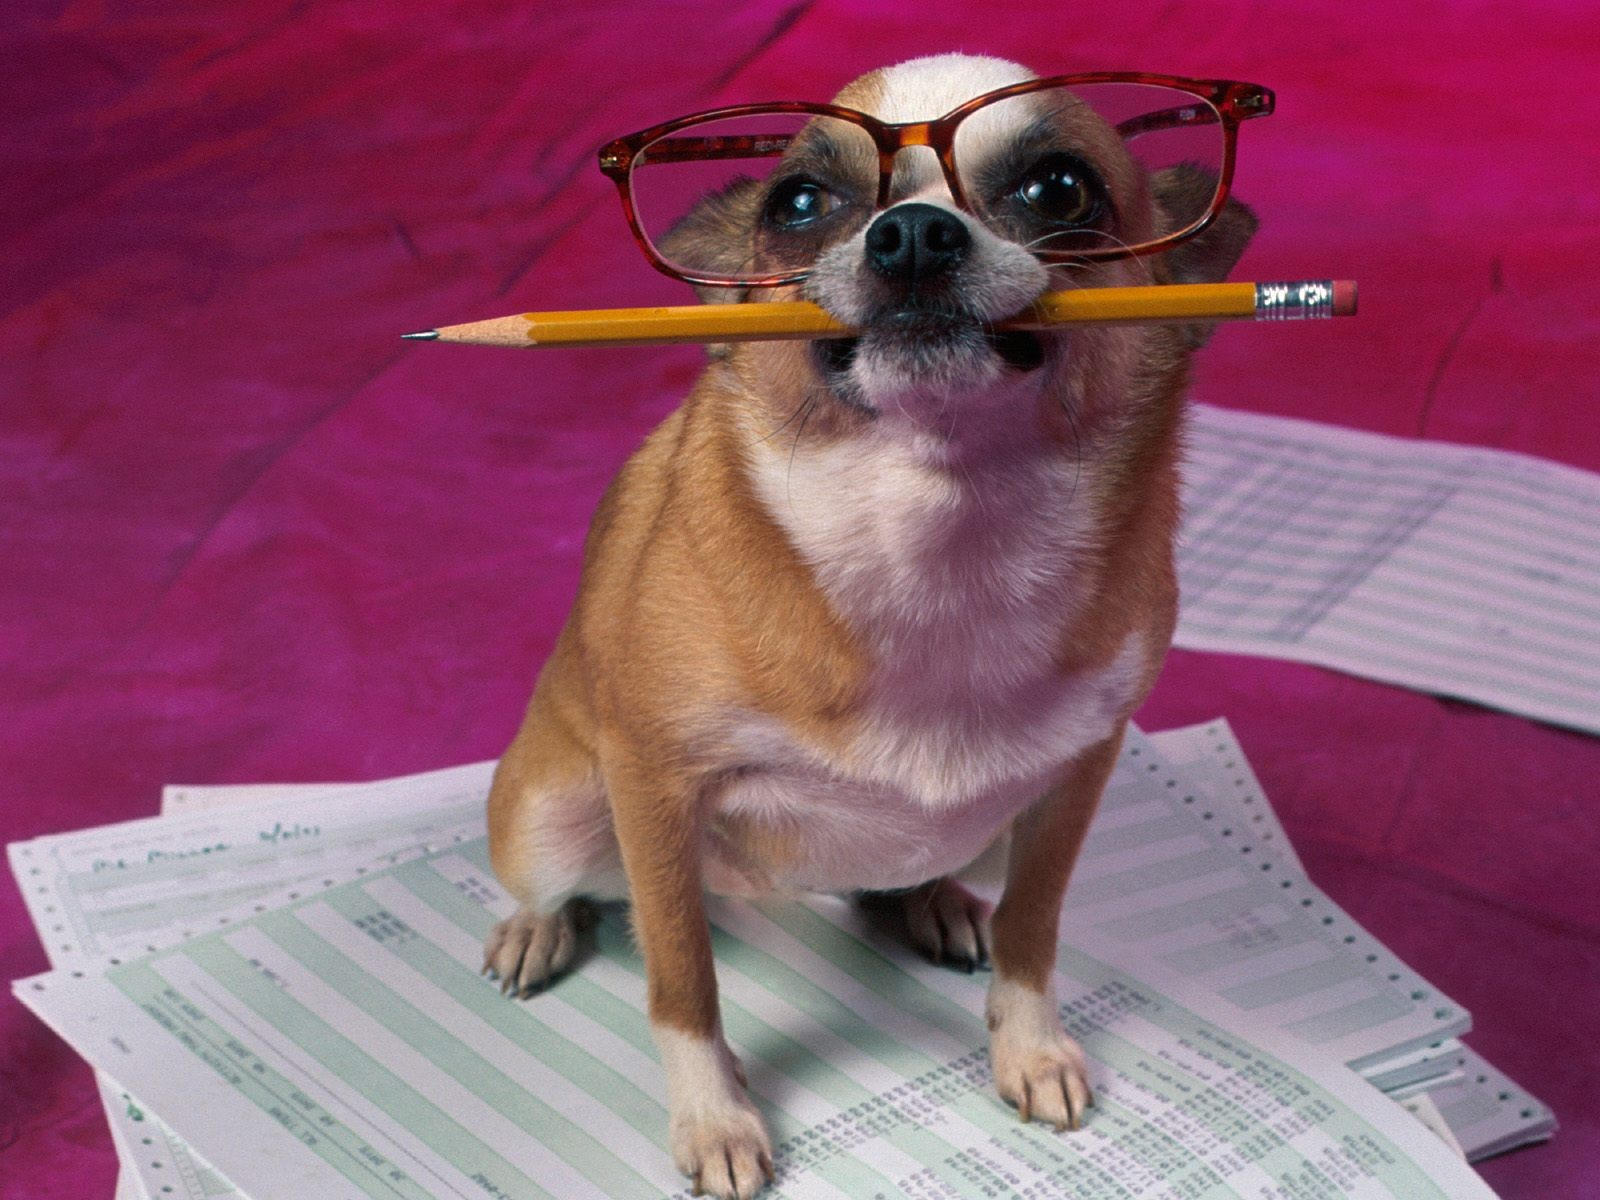 A Chihuahua sitting on the papers while wearing glasses and holding a pencil with its mouth